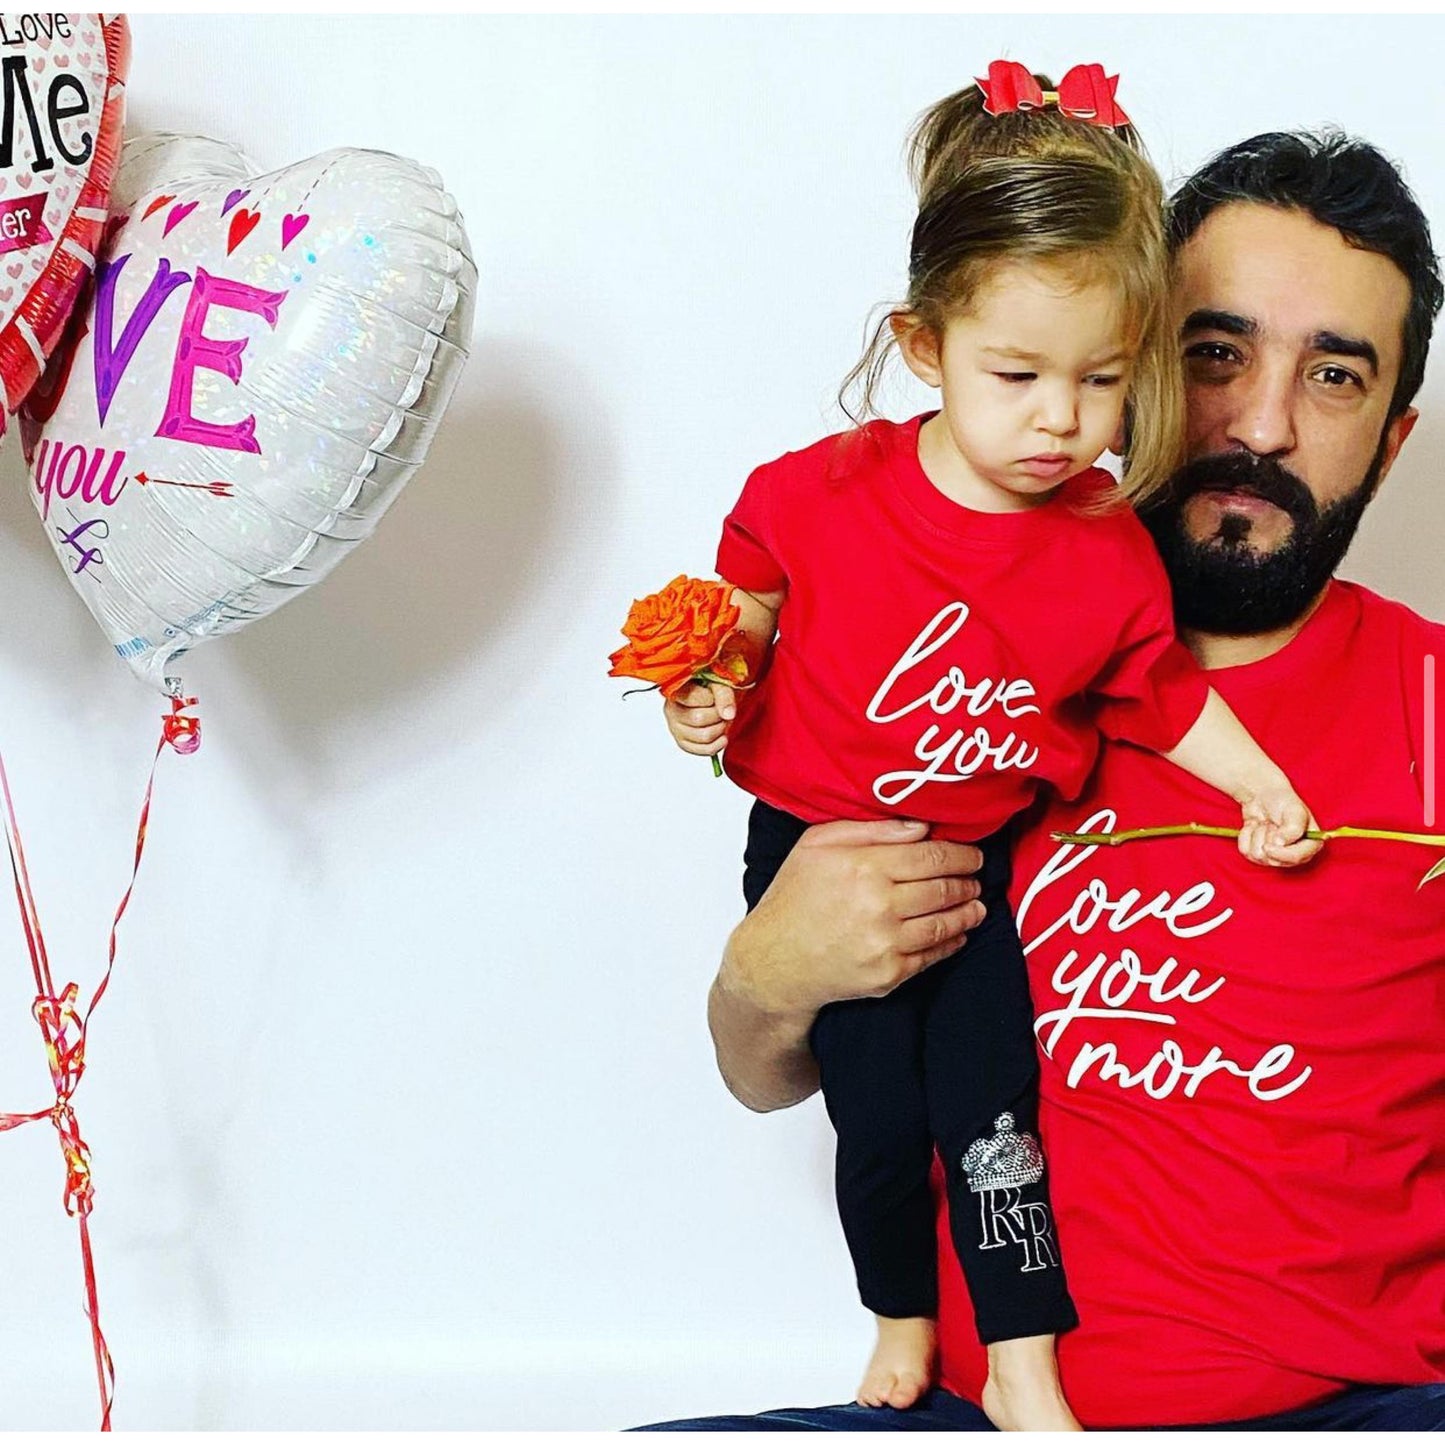 Love You, Love You More Valentine's Day Twinning Tees